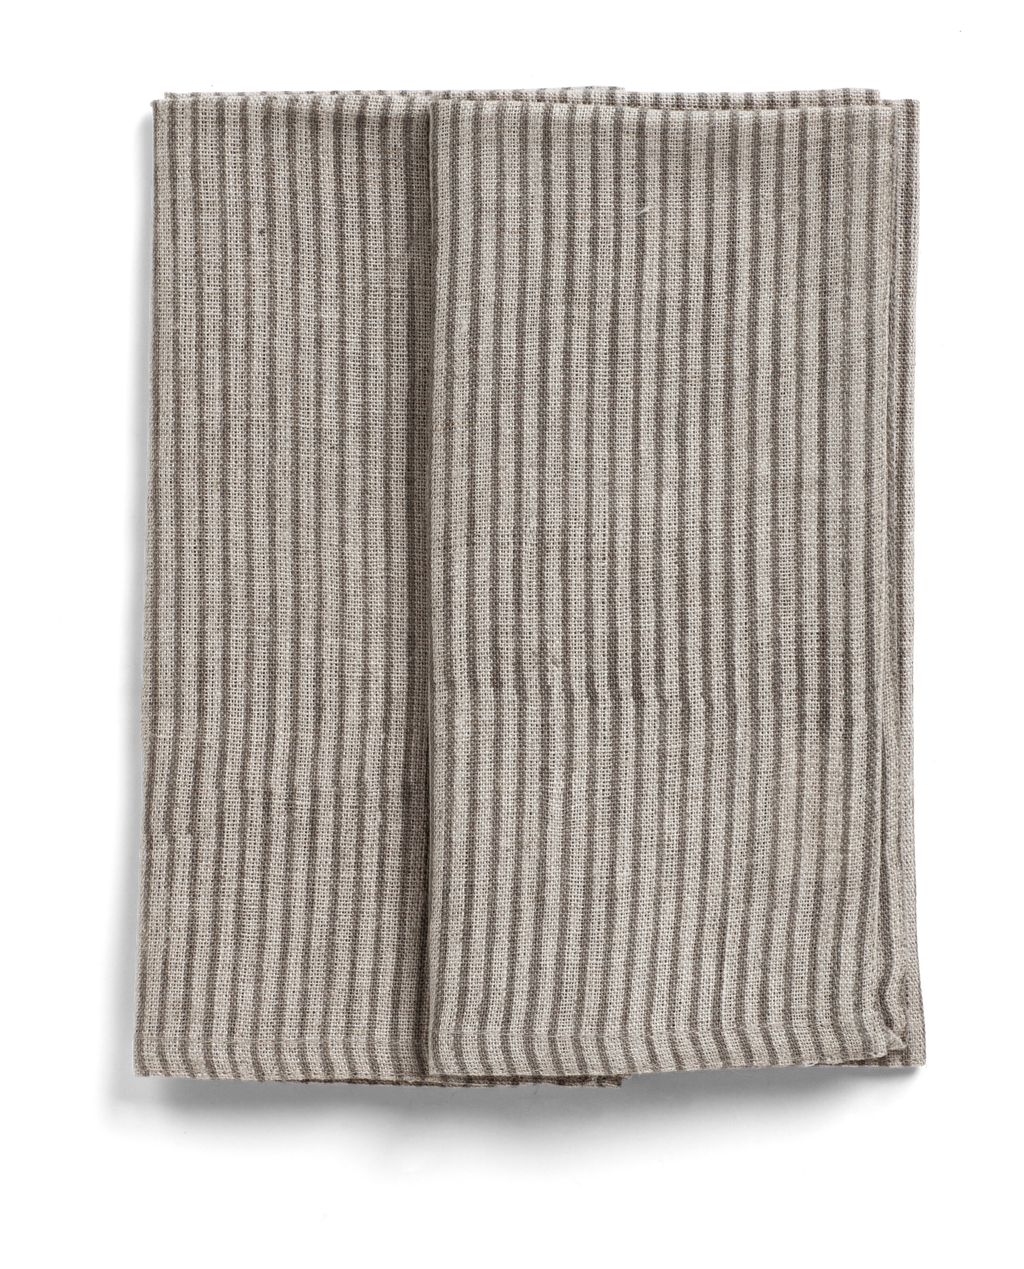 Linen napkins with Steel Grey stripes